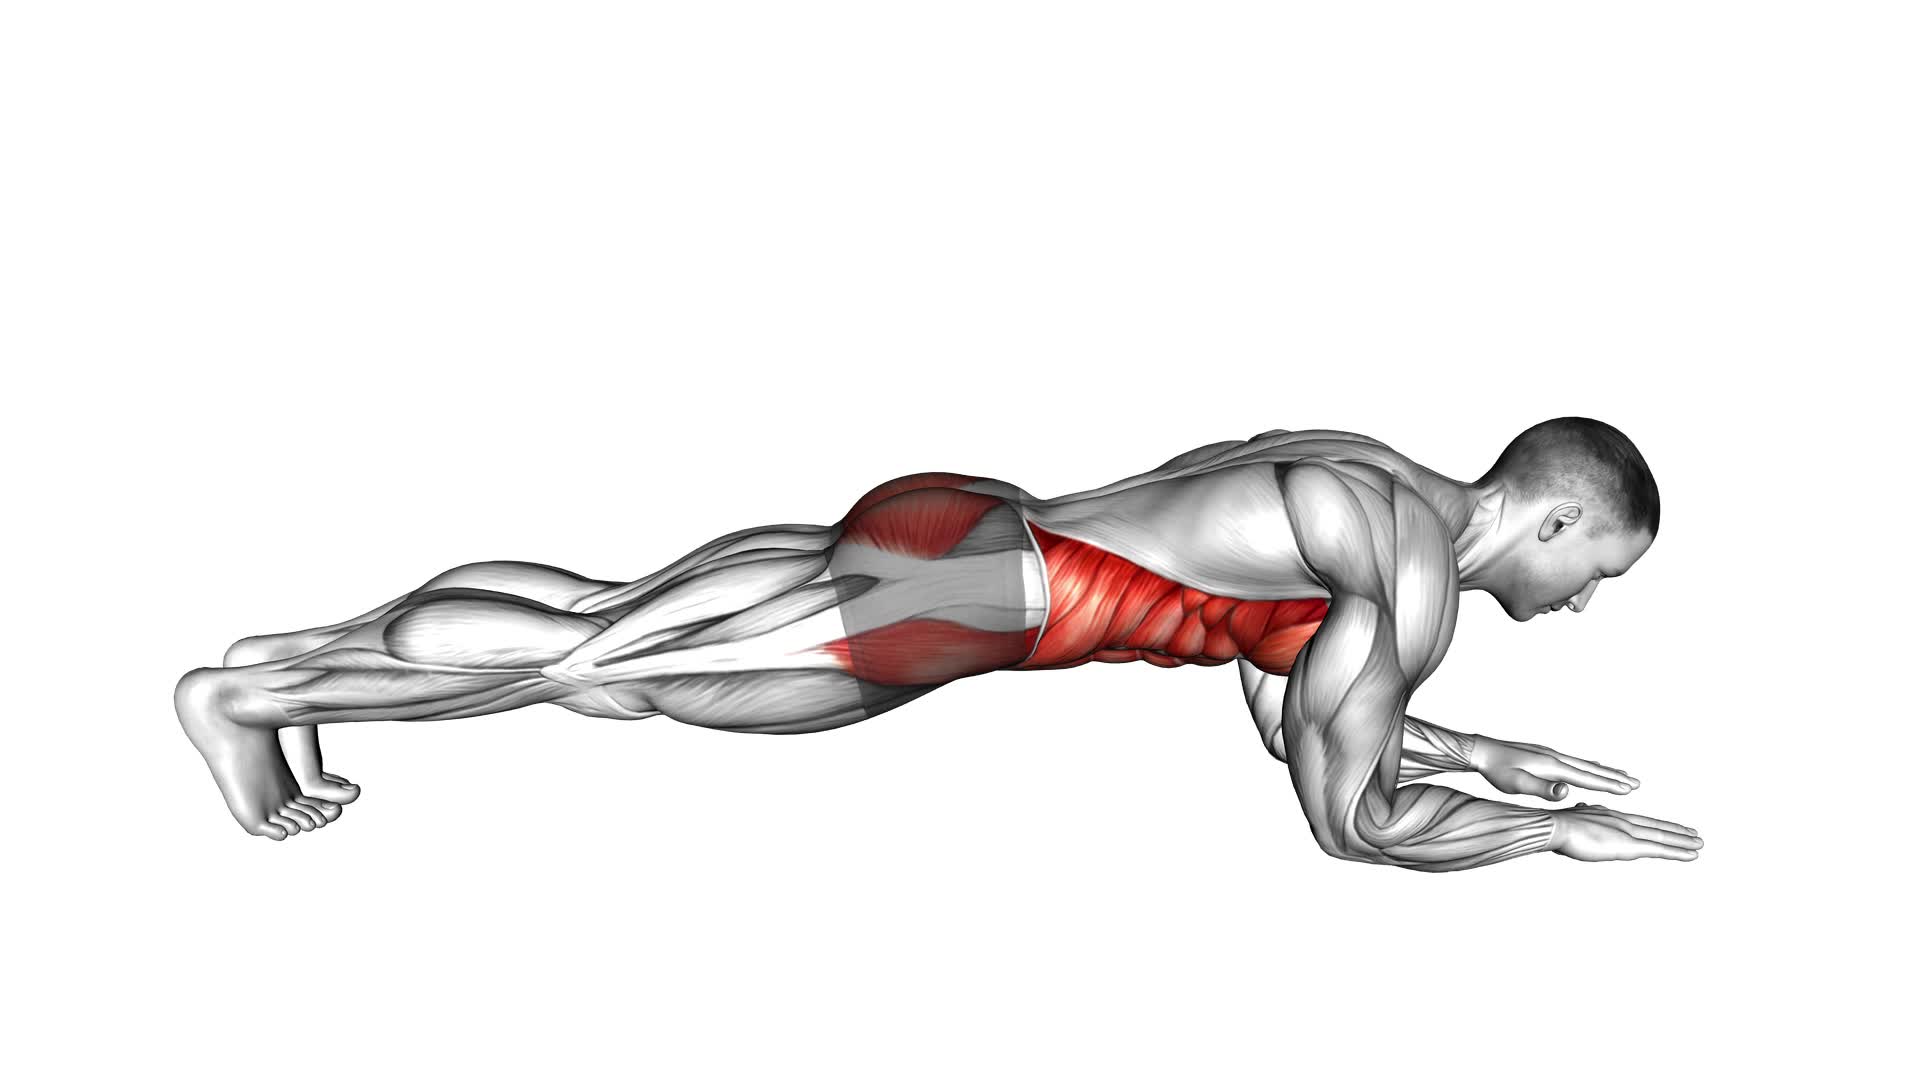 Front Plank (male) - Video Exercise Guide & Tips